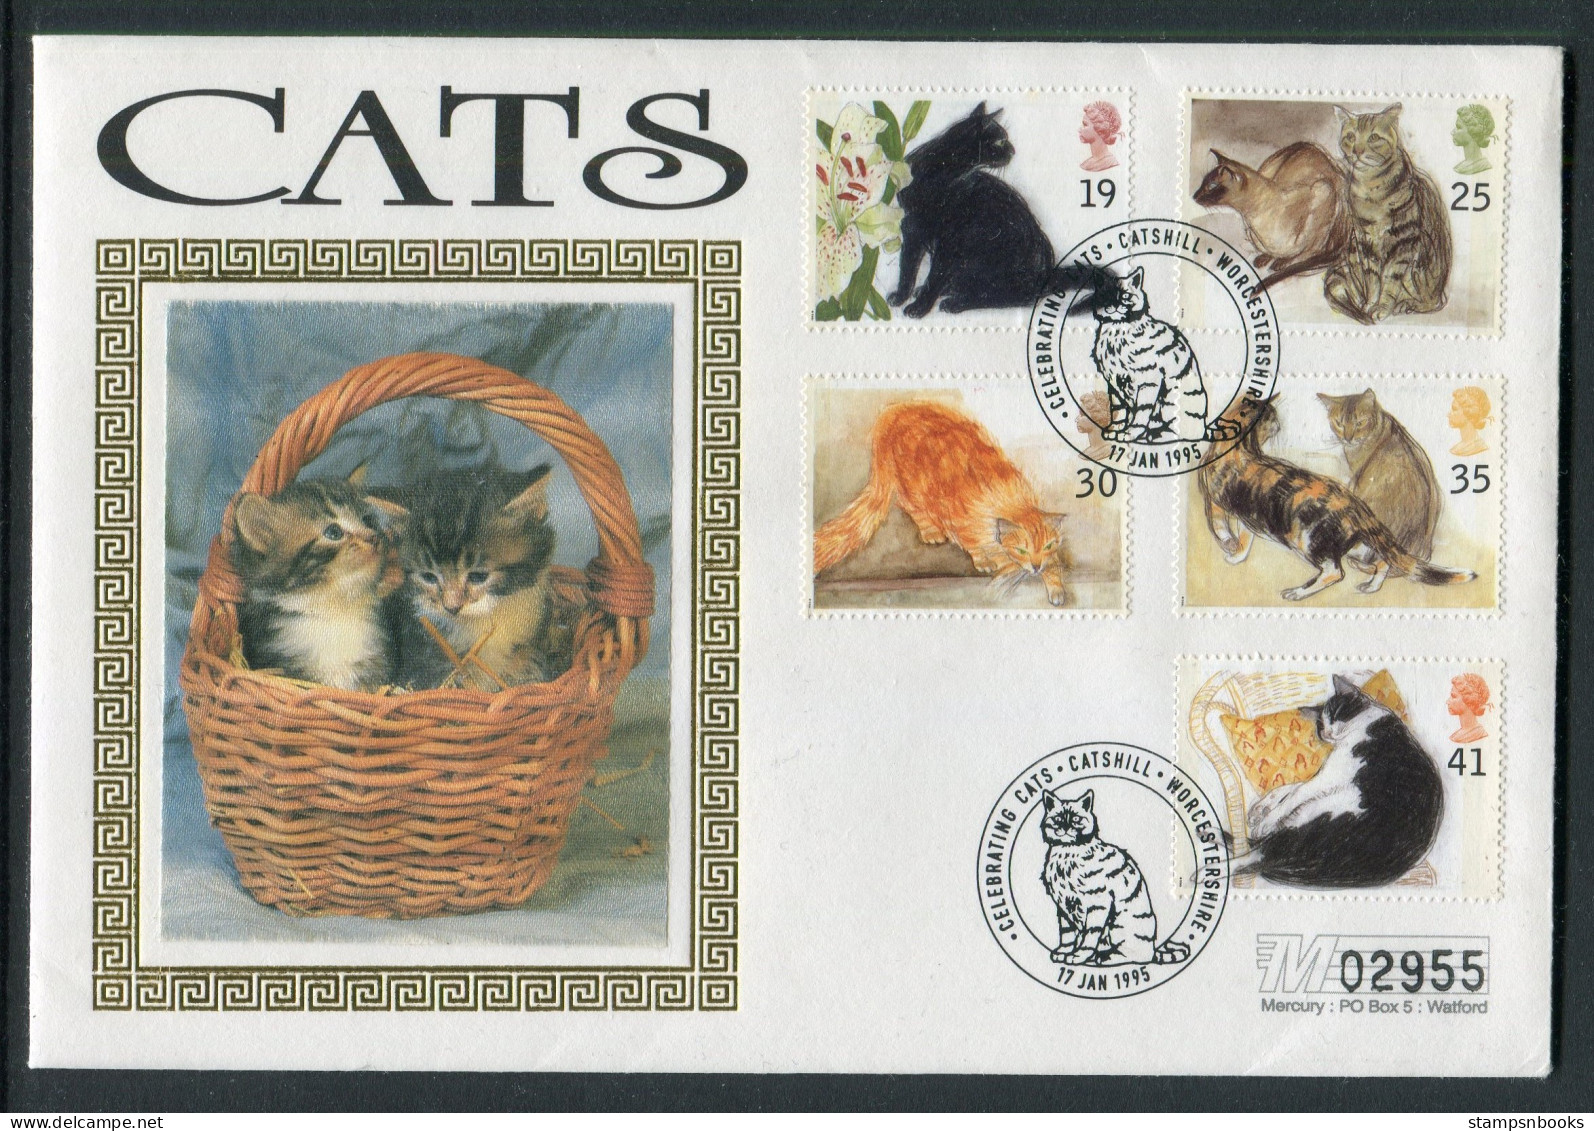 1995 GB Cats First Day Cover, Catshill Worcestershire FDC - 1991-2000 Em. Décimales